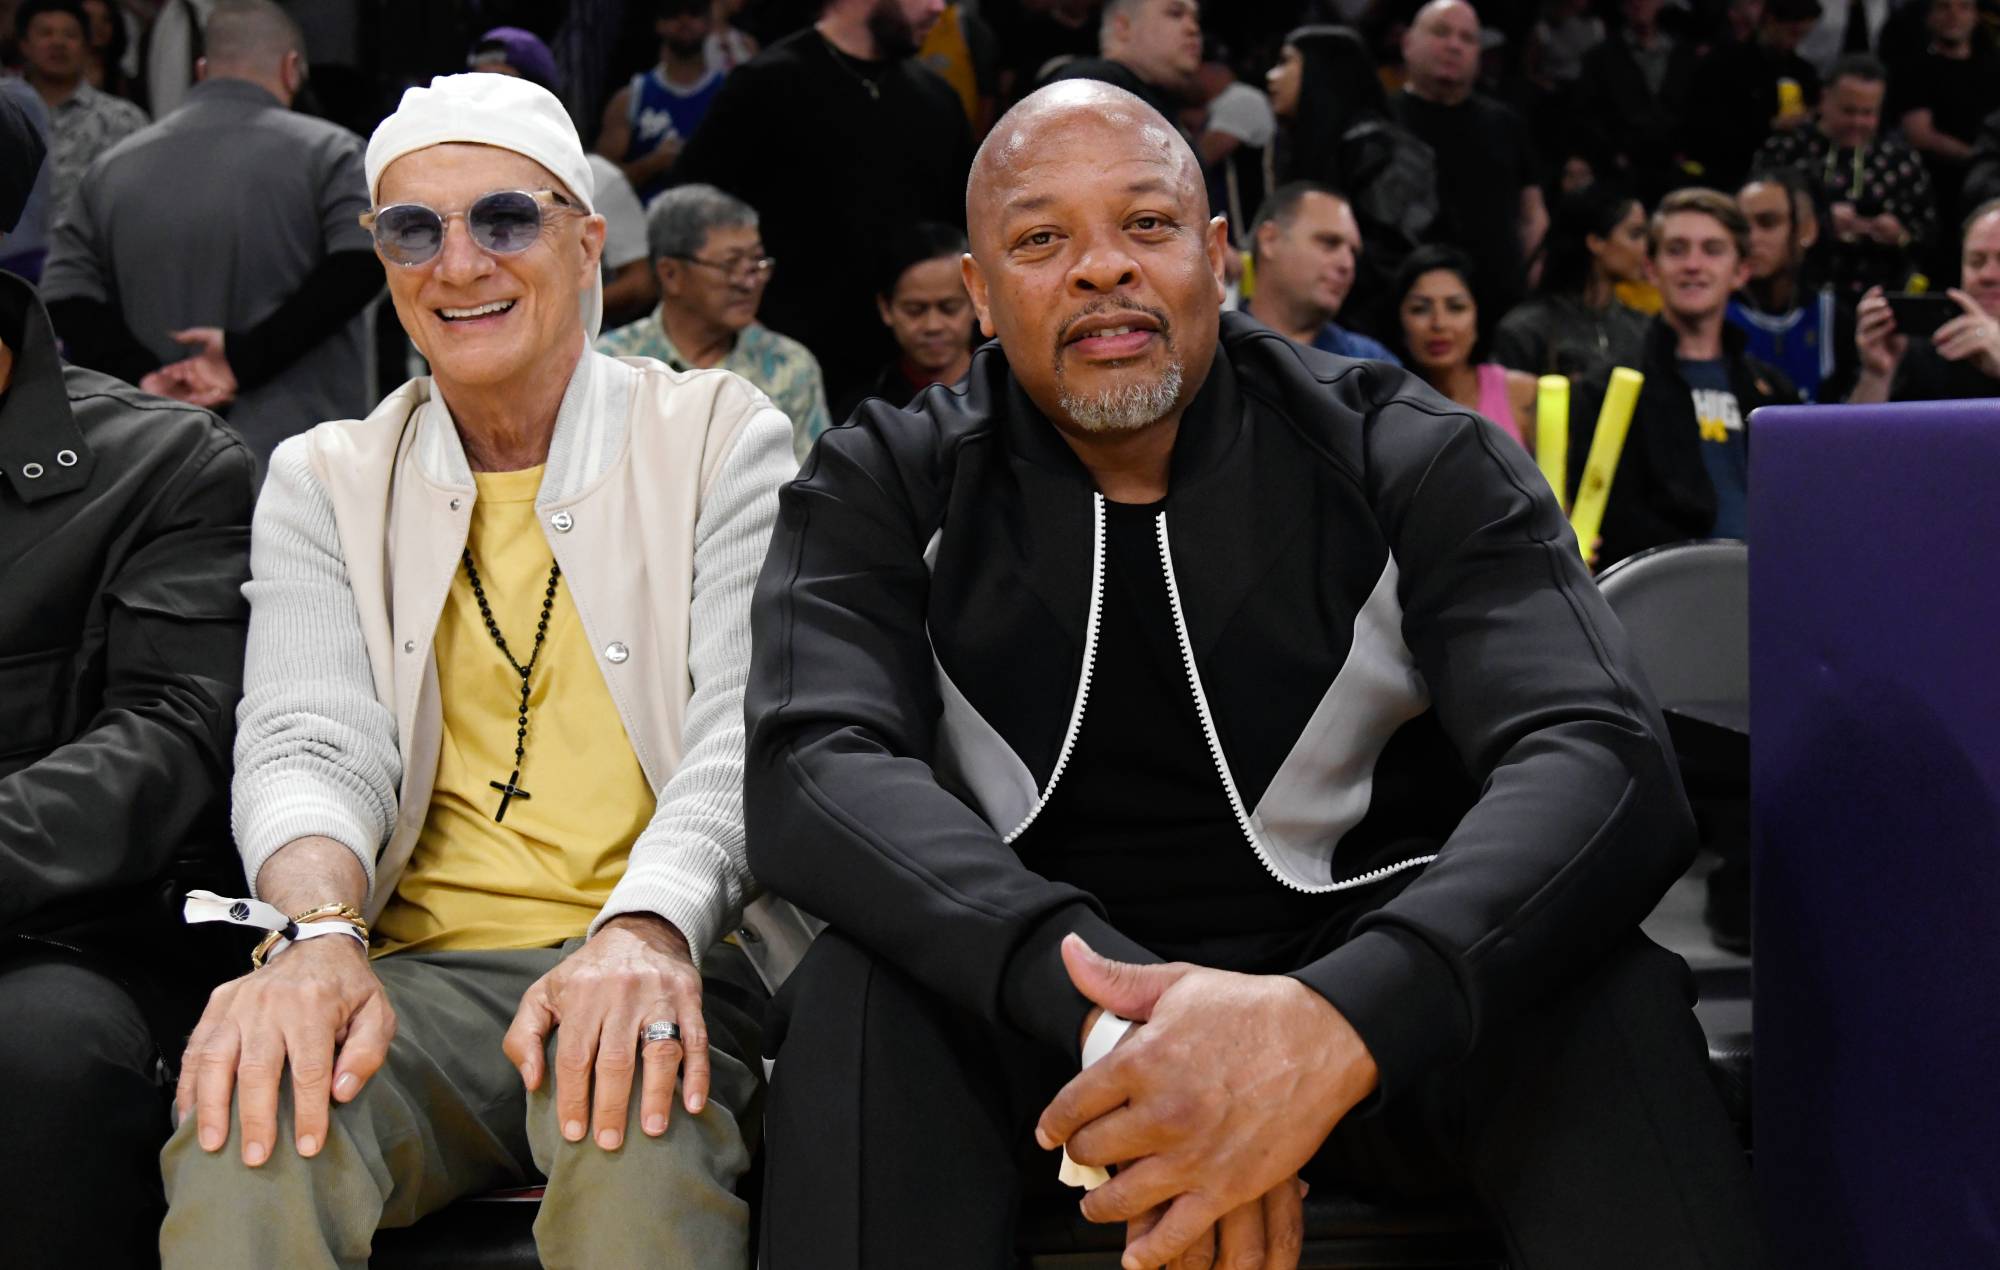 Dr. Dre and Jimmy Iovine attend a basketball game between Los Angeles Lakers and Memphis Grizzlies Round 1 Game 6 of the 2023 NBA Playoffs against Los Angeles Lakers at Crypto.com Arena on April 28, 2023 in Los Angeles, California. (Photo by Kevork Djansezian/Getty Images)